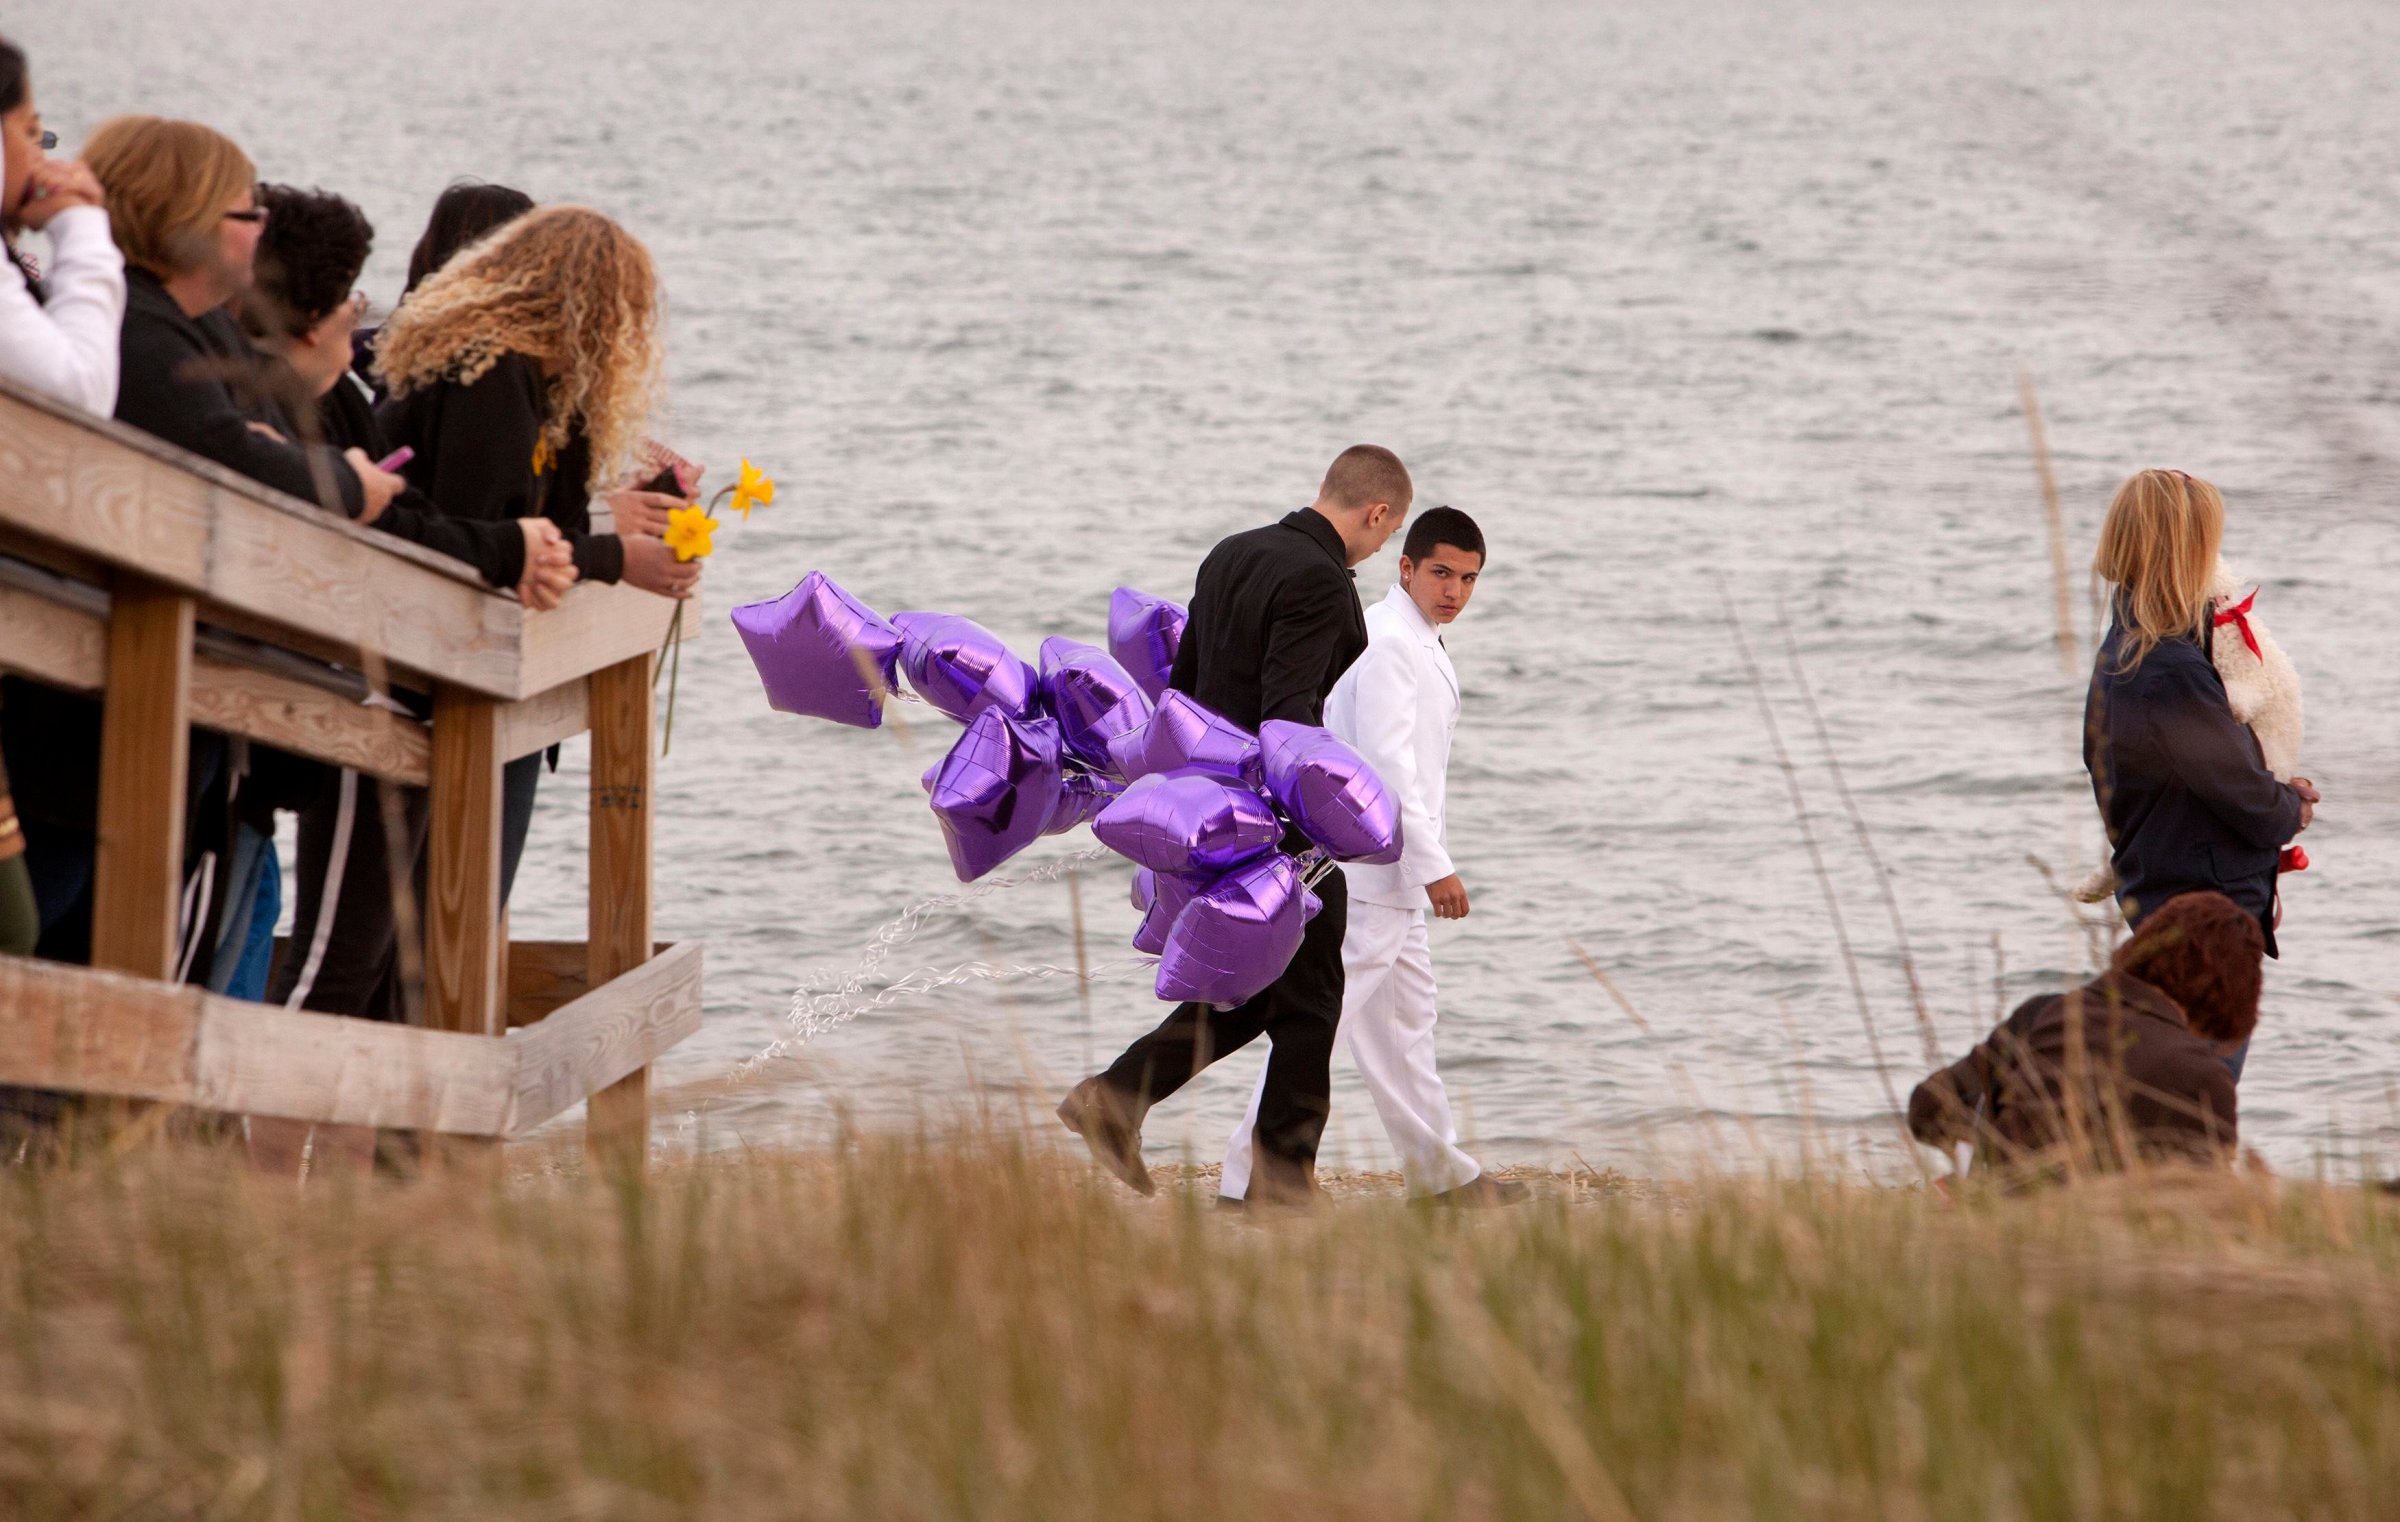 Students arrive at beach for vigil in honor of slain student Sanchez wearing prom clothes carrying balloons in Milford